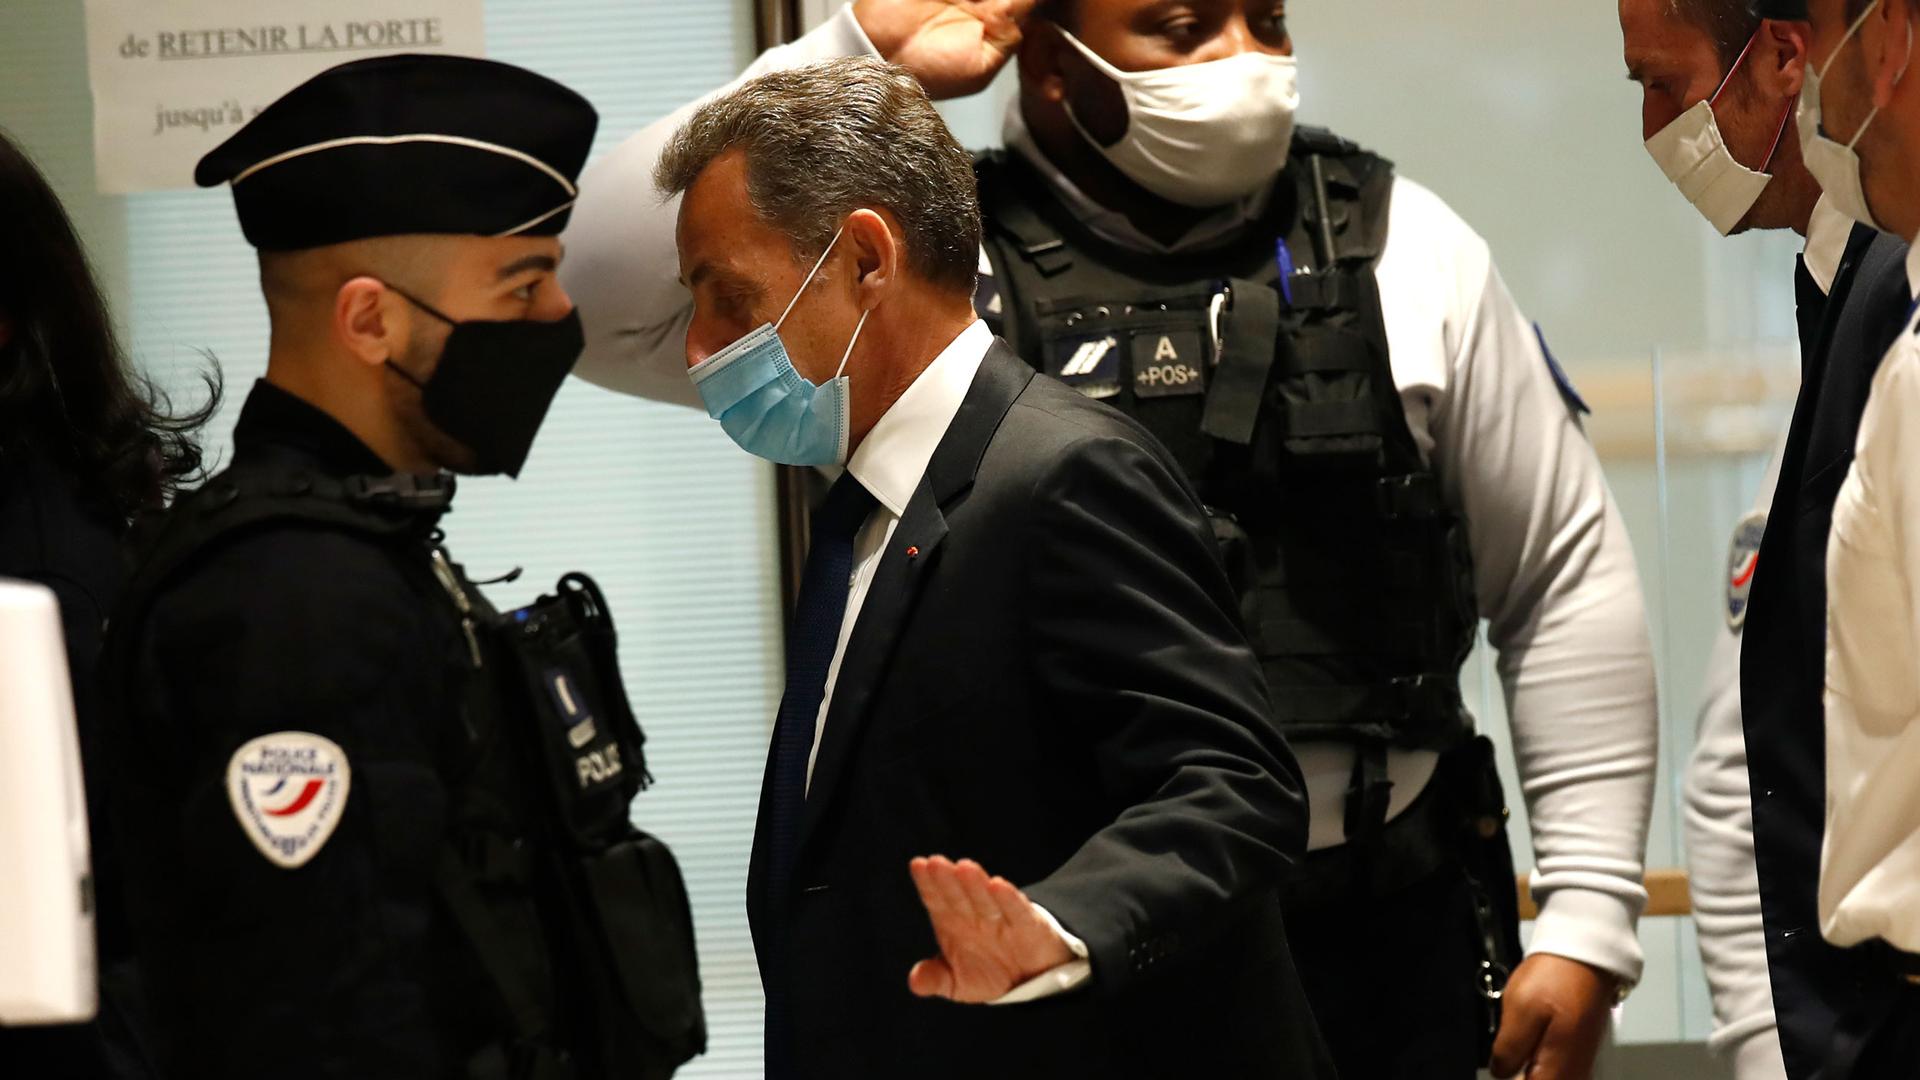 Former French President Nicolas Sarkozy is shown wearing a dark suit and tie with a face mask, walking past security officials.